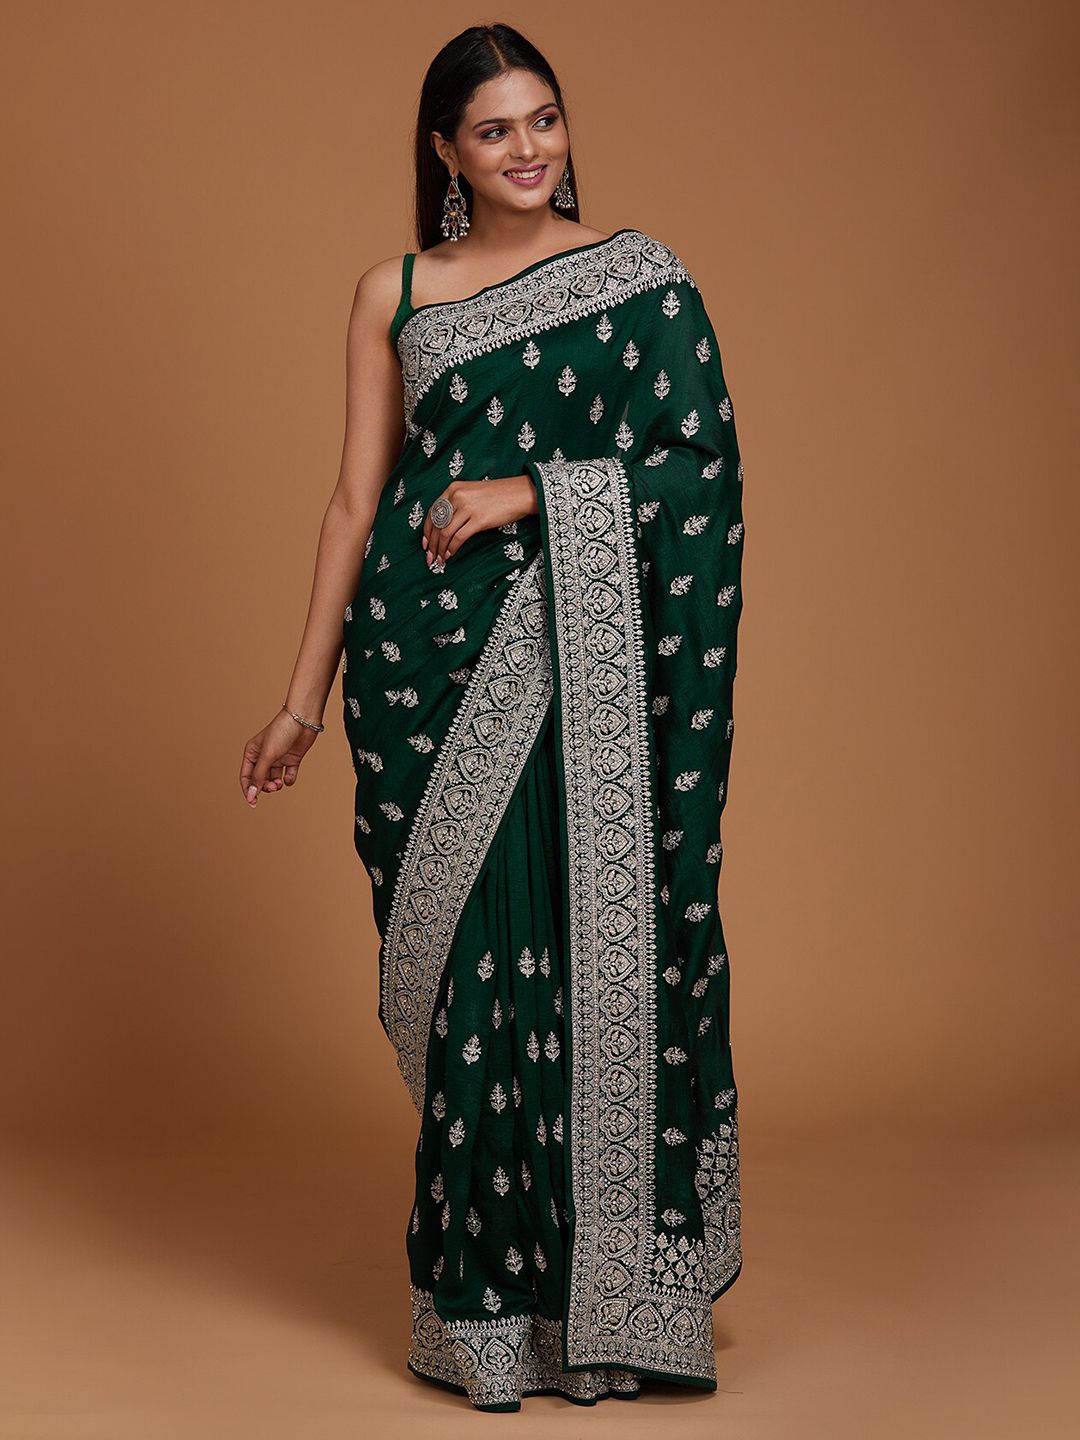 Koskii Women Green & Silver-Toned Ombre Embroidered Art Silk Saree Price in India